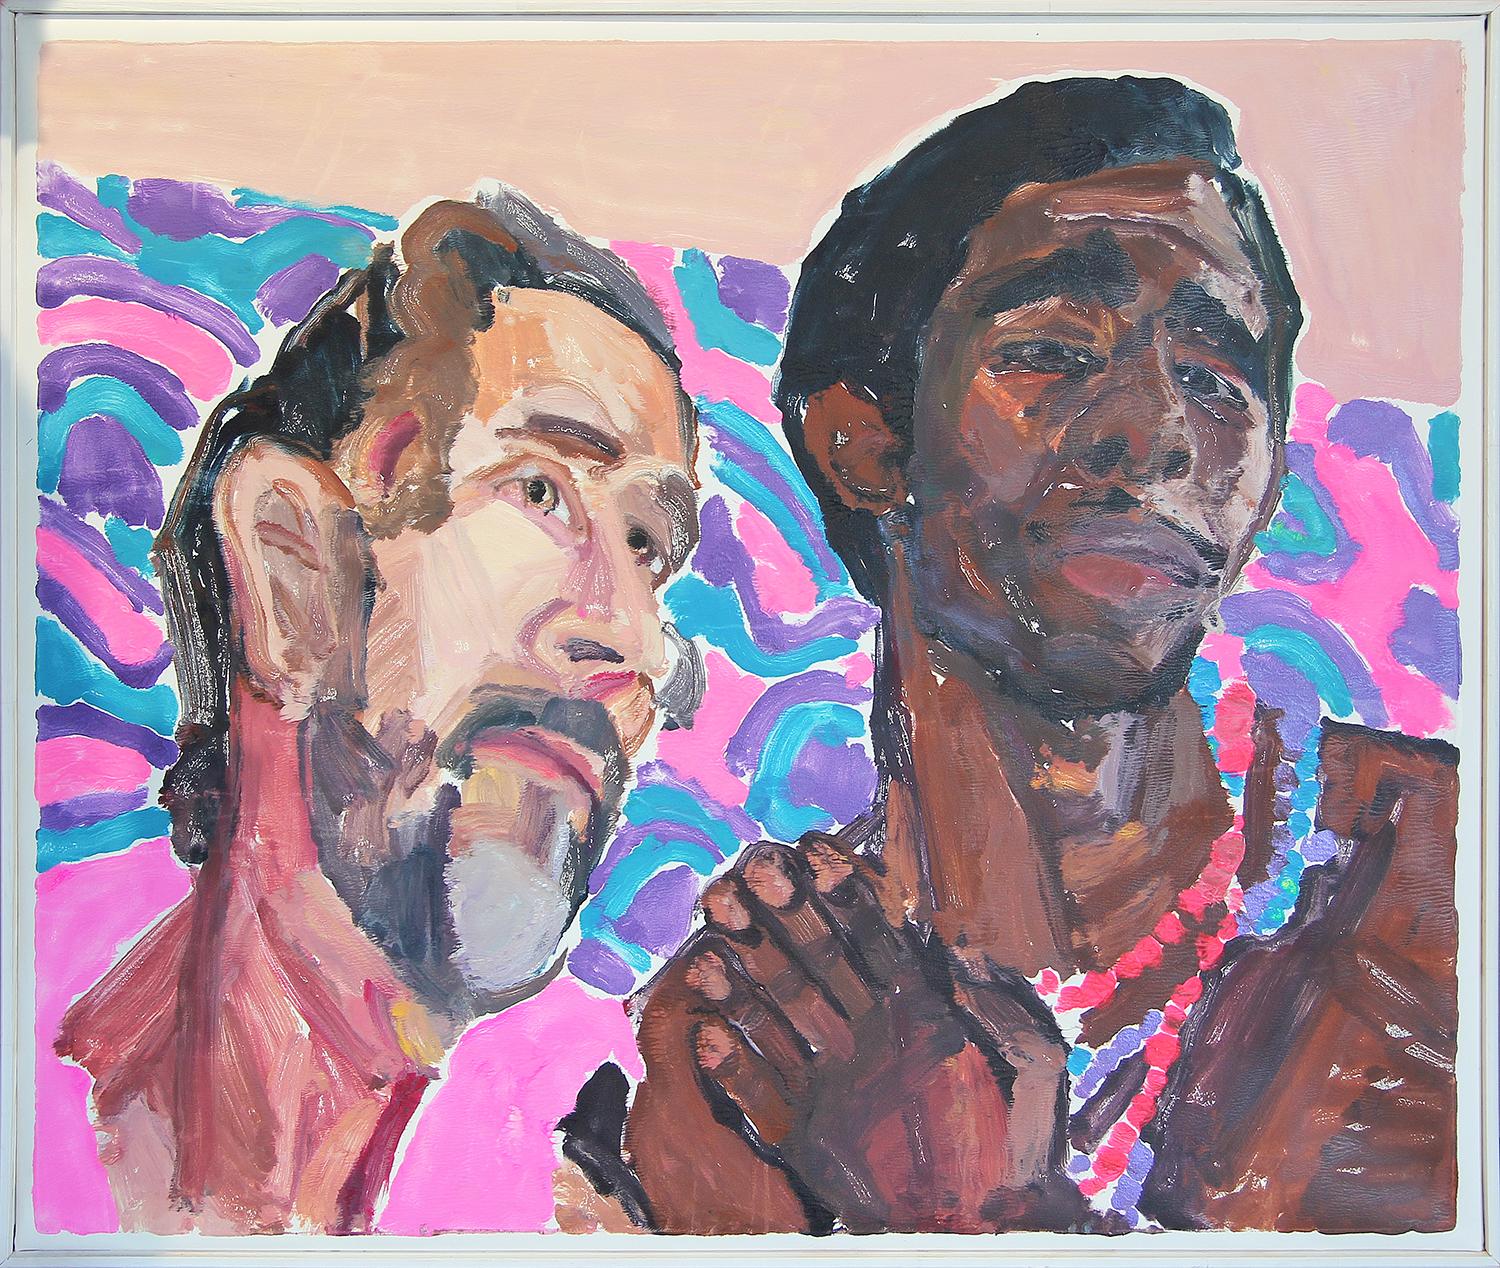 Saralene Tapley Portrait Print - "Gary and Elo" Contemporary Abstract Blue and Pink Male Portrait Painting